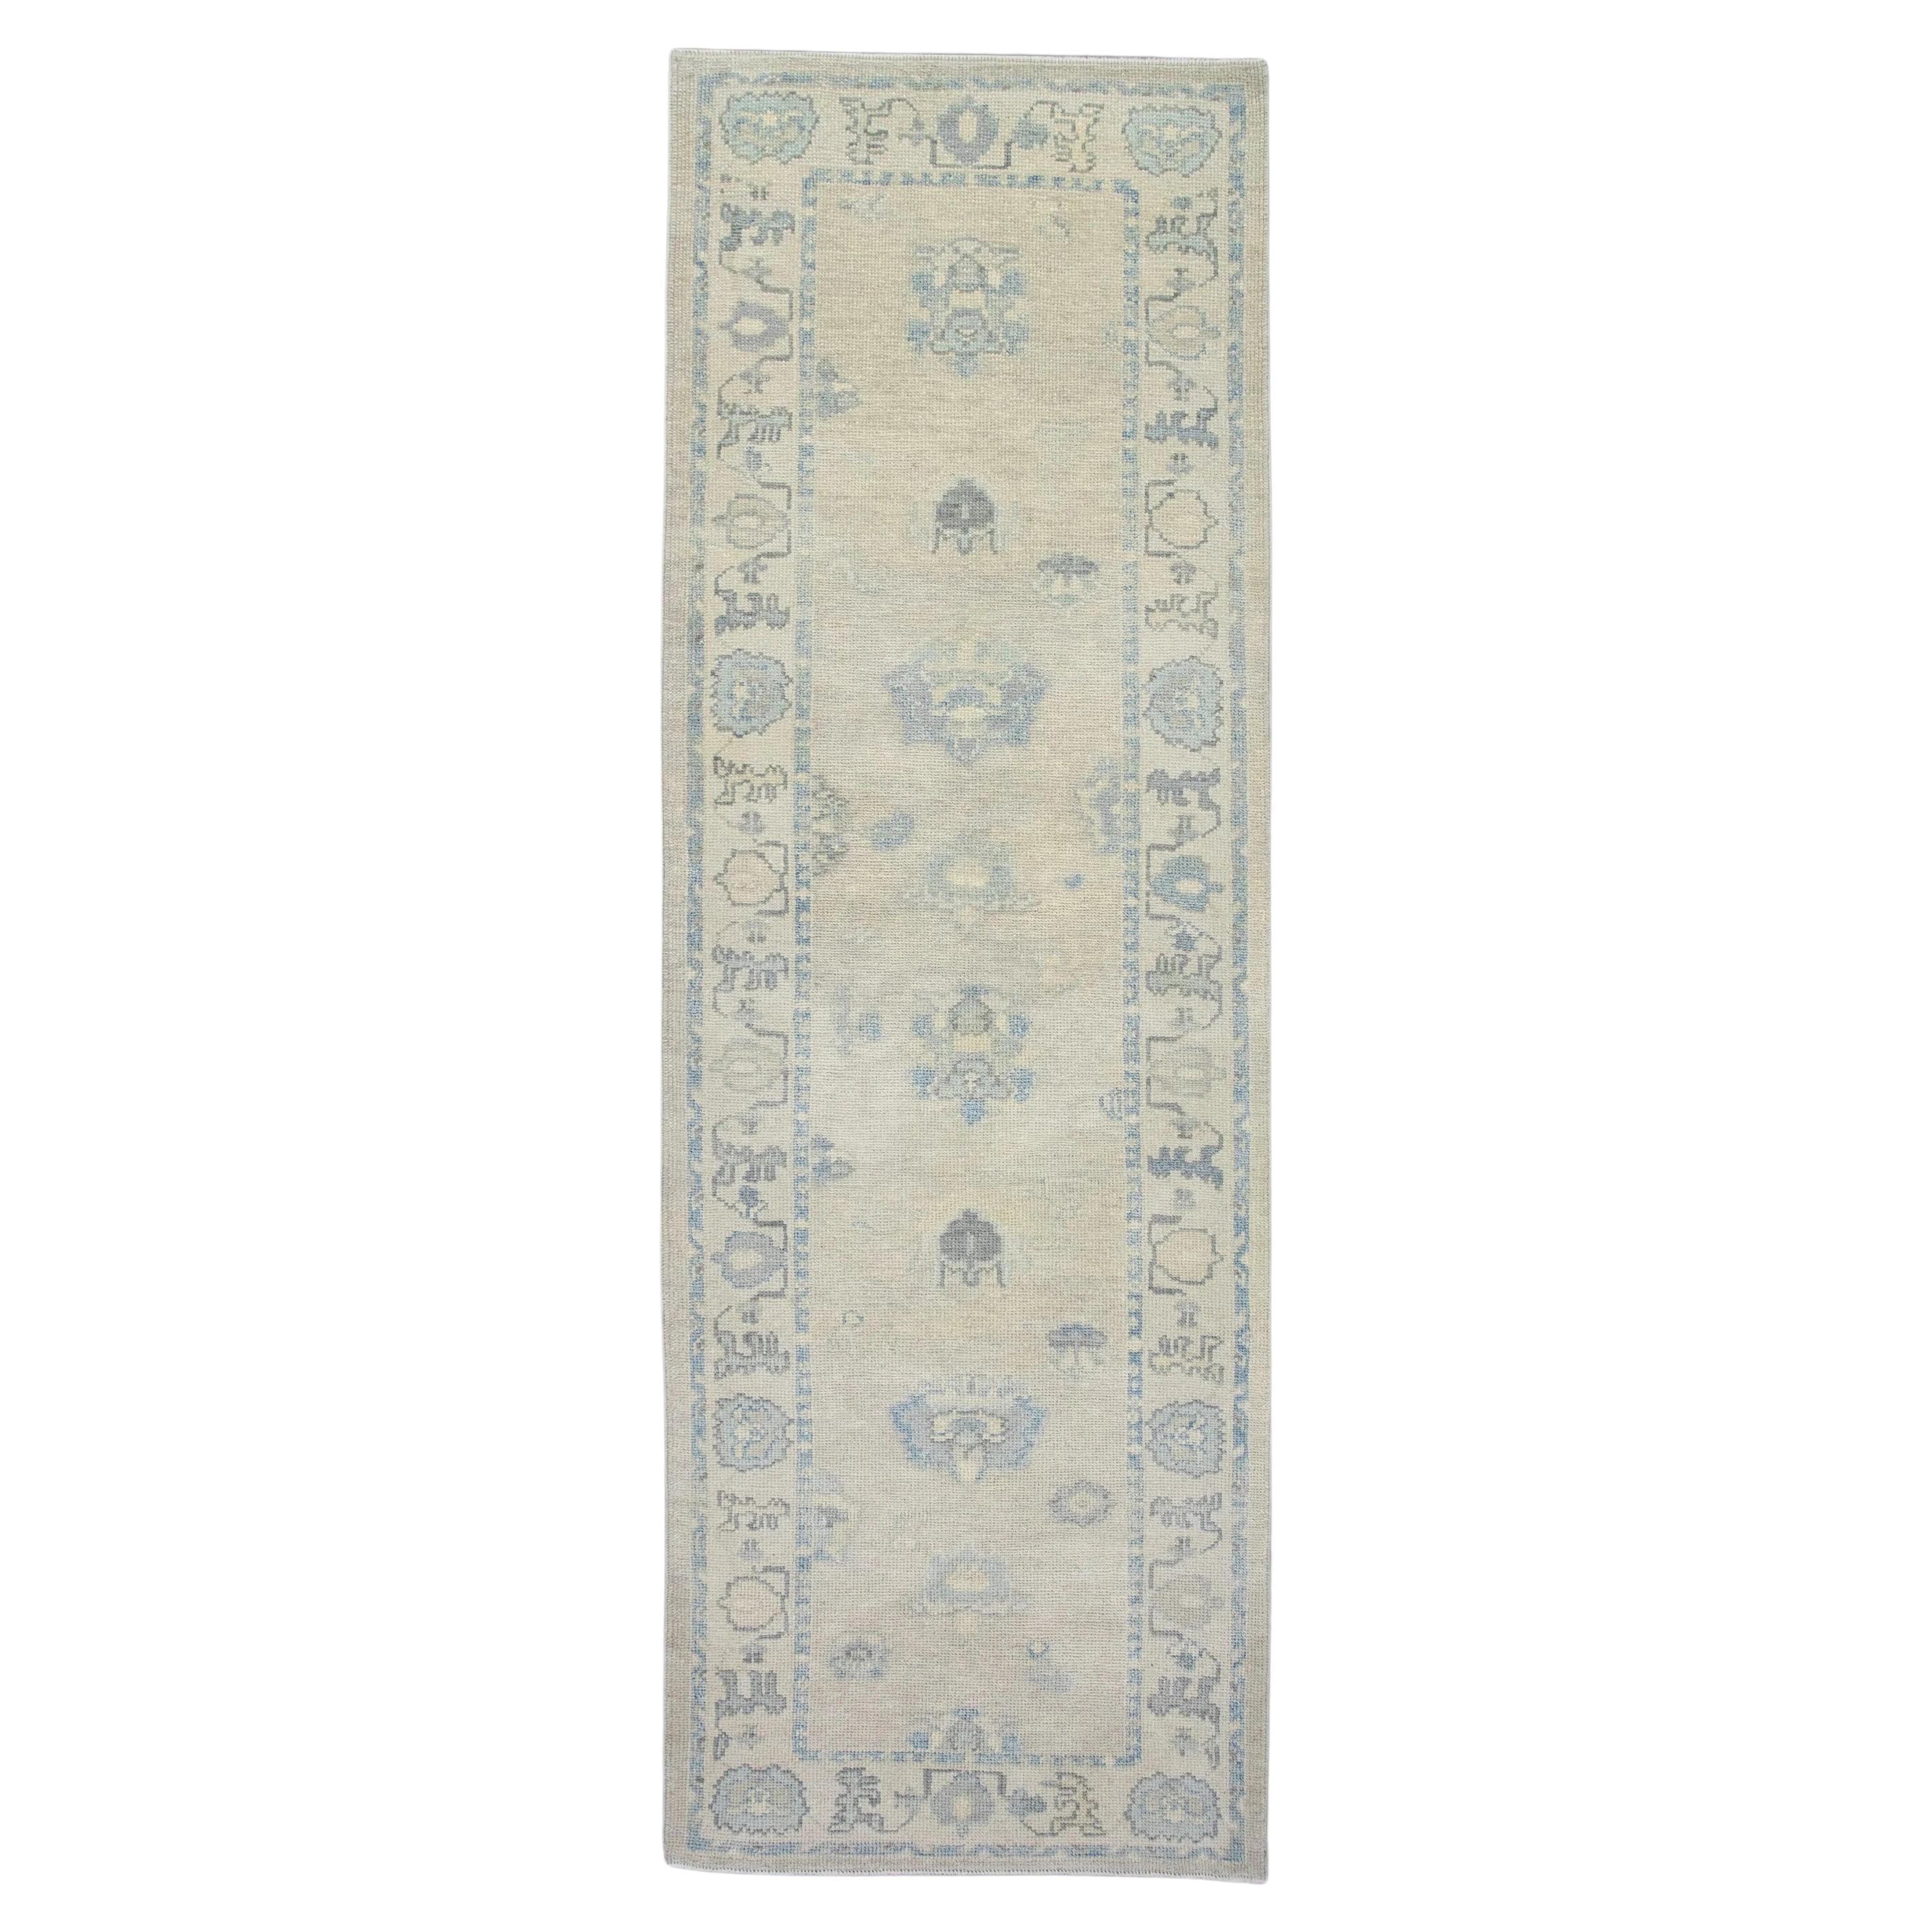 Floral Handwoven Wool Turkish Oushak Rug in Cream and Soft Blue 3'2" x 9'9"